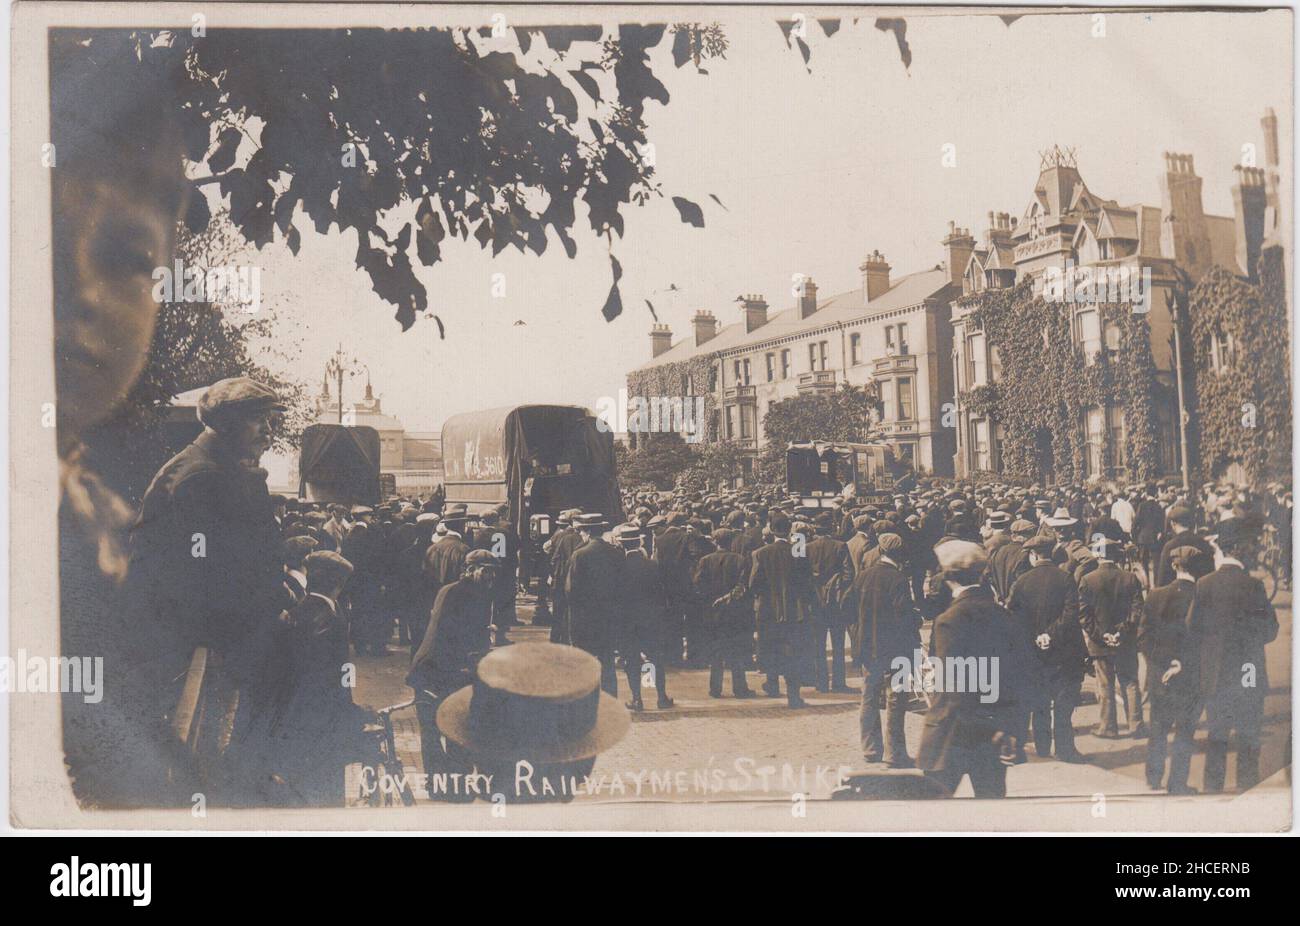 'Coventry railwaymen's strike': photograph taken during the 1911 transport workers' strike. The image shows a large group of people blocking the road to the railway station, with carts stopped in the road. A young boy is looking into the camera Stock Photo